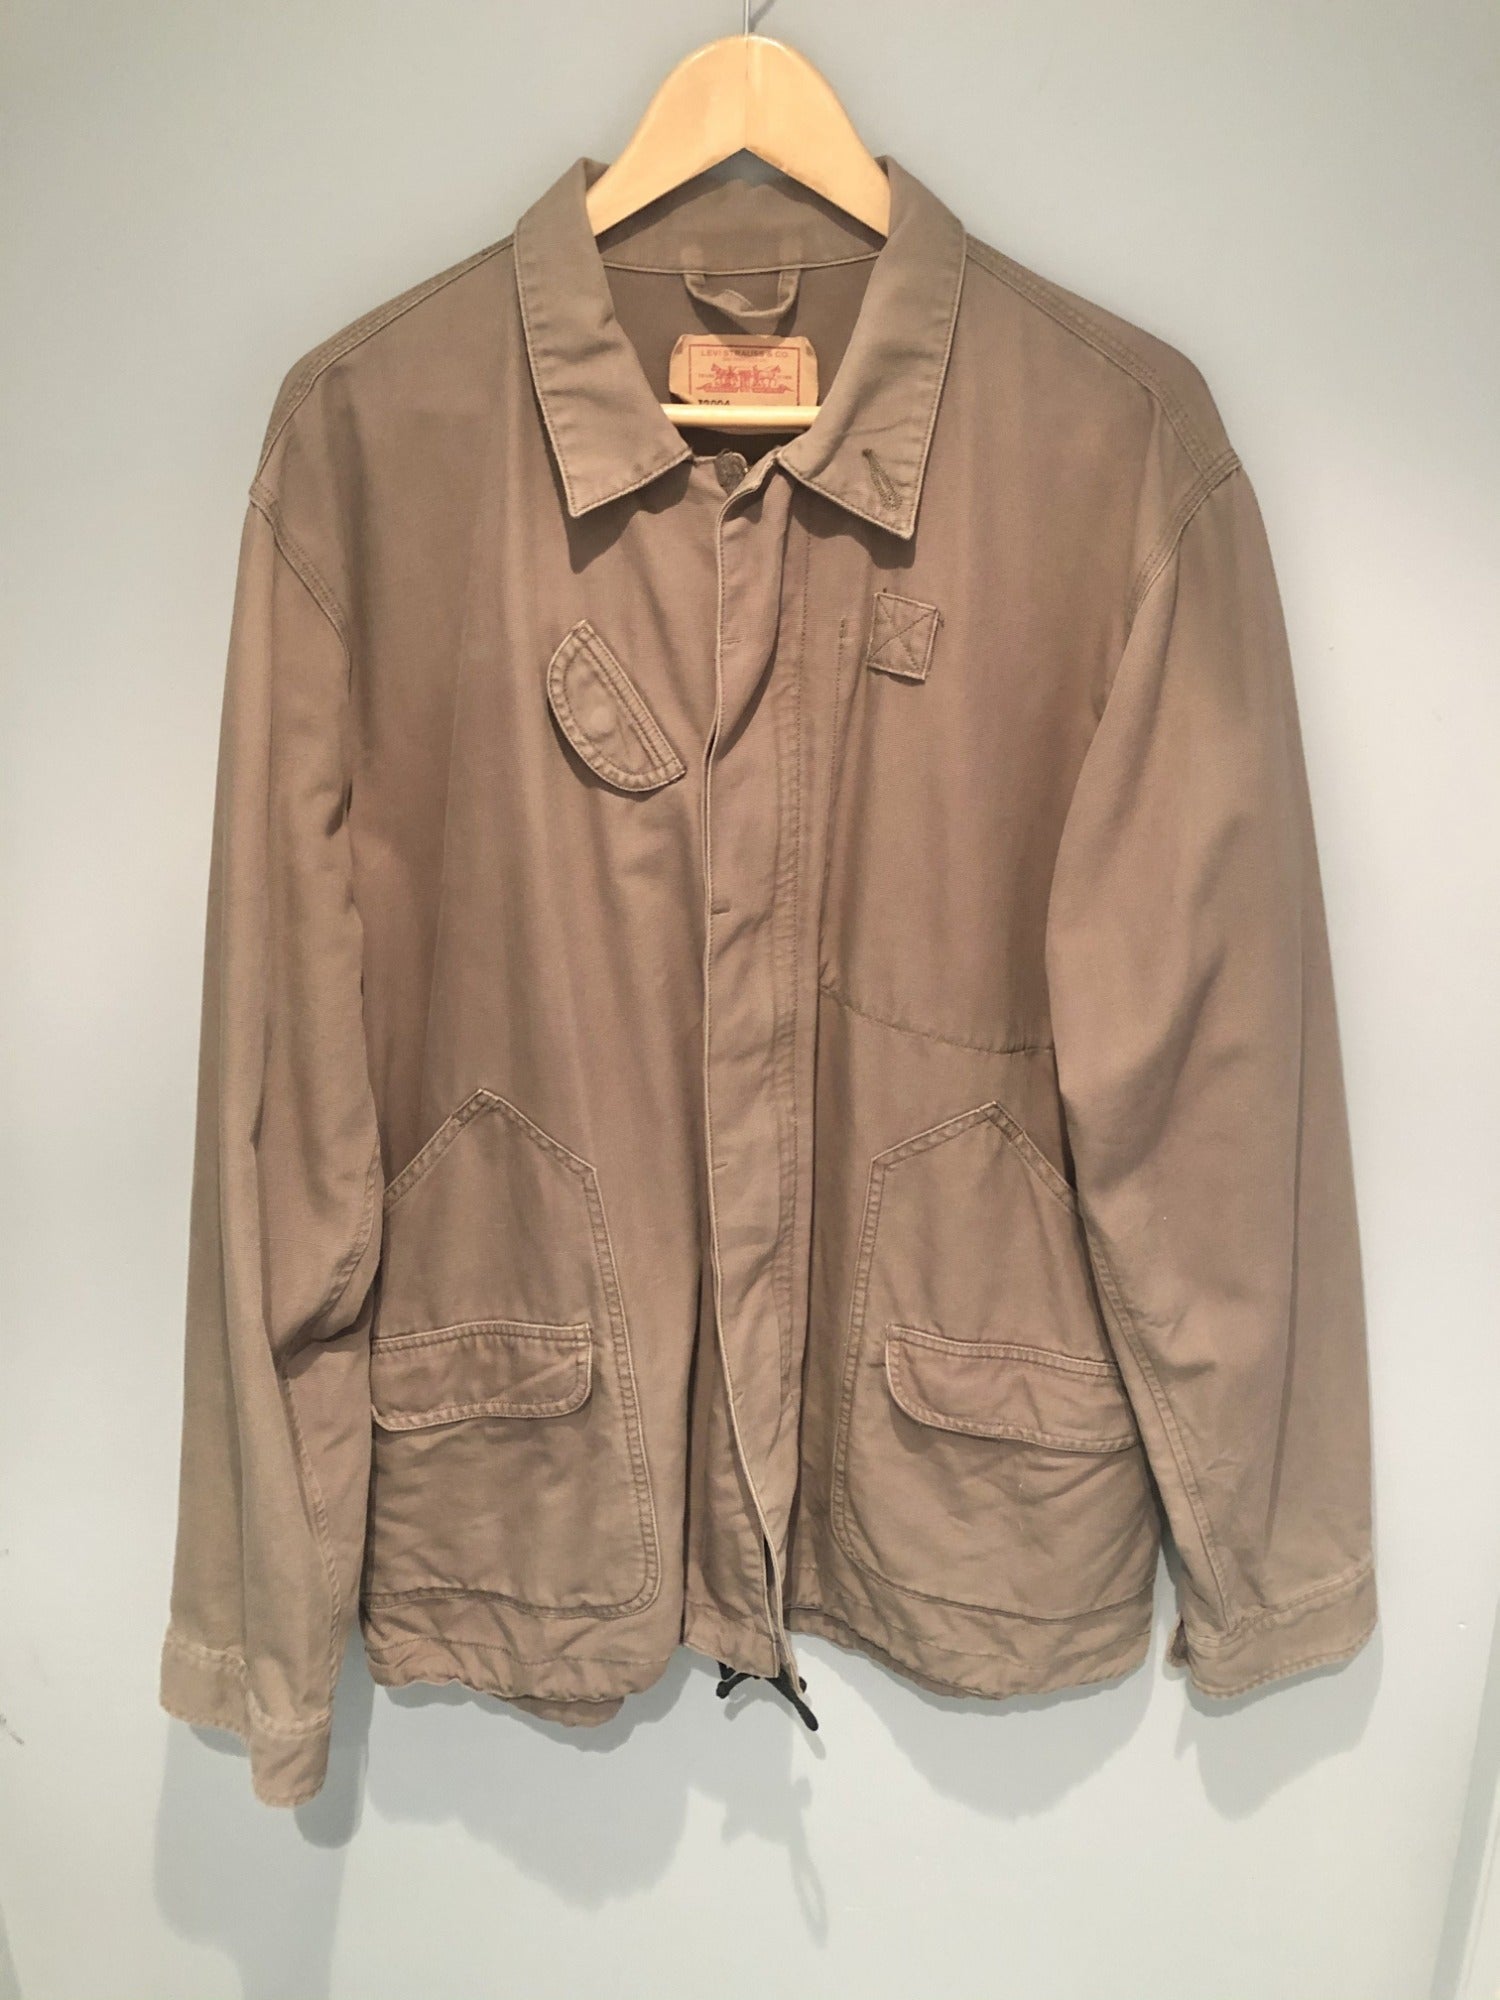 Mens Levis Strauss & Co Jacket in Light Brown - Size L